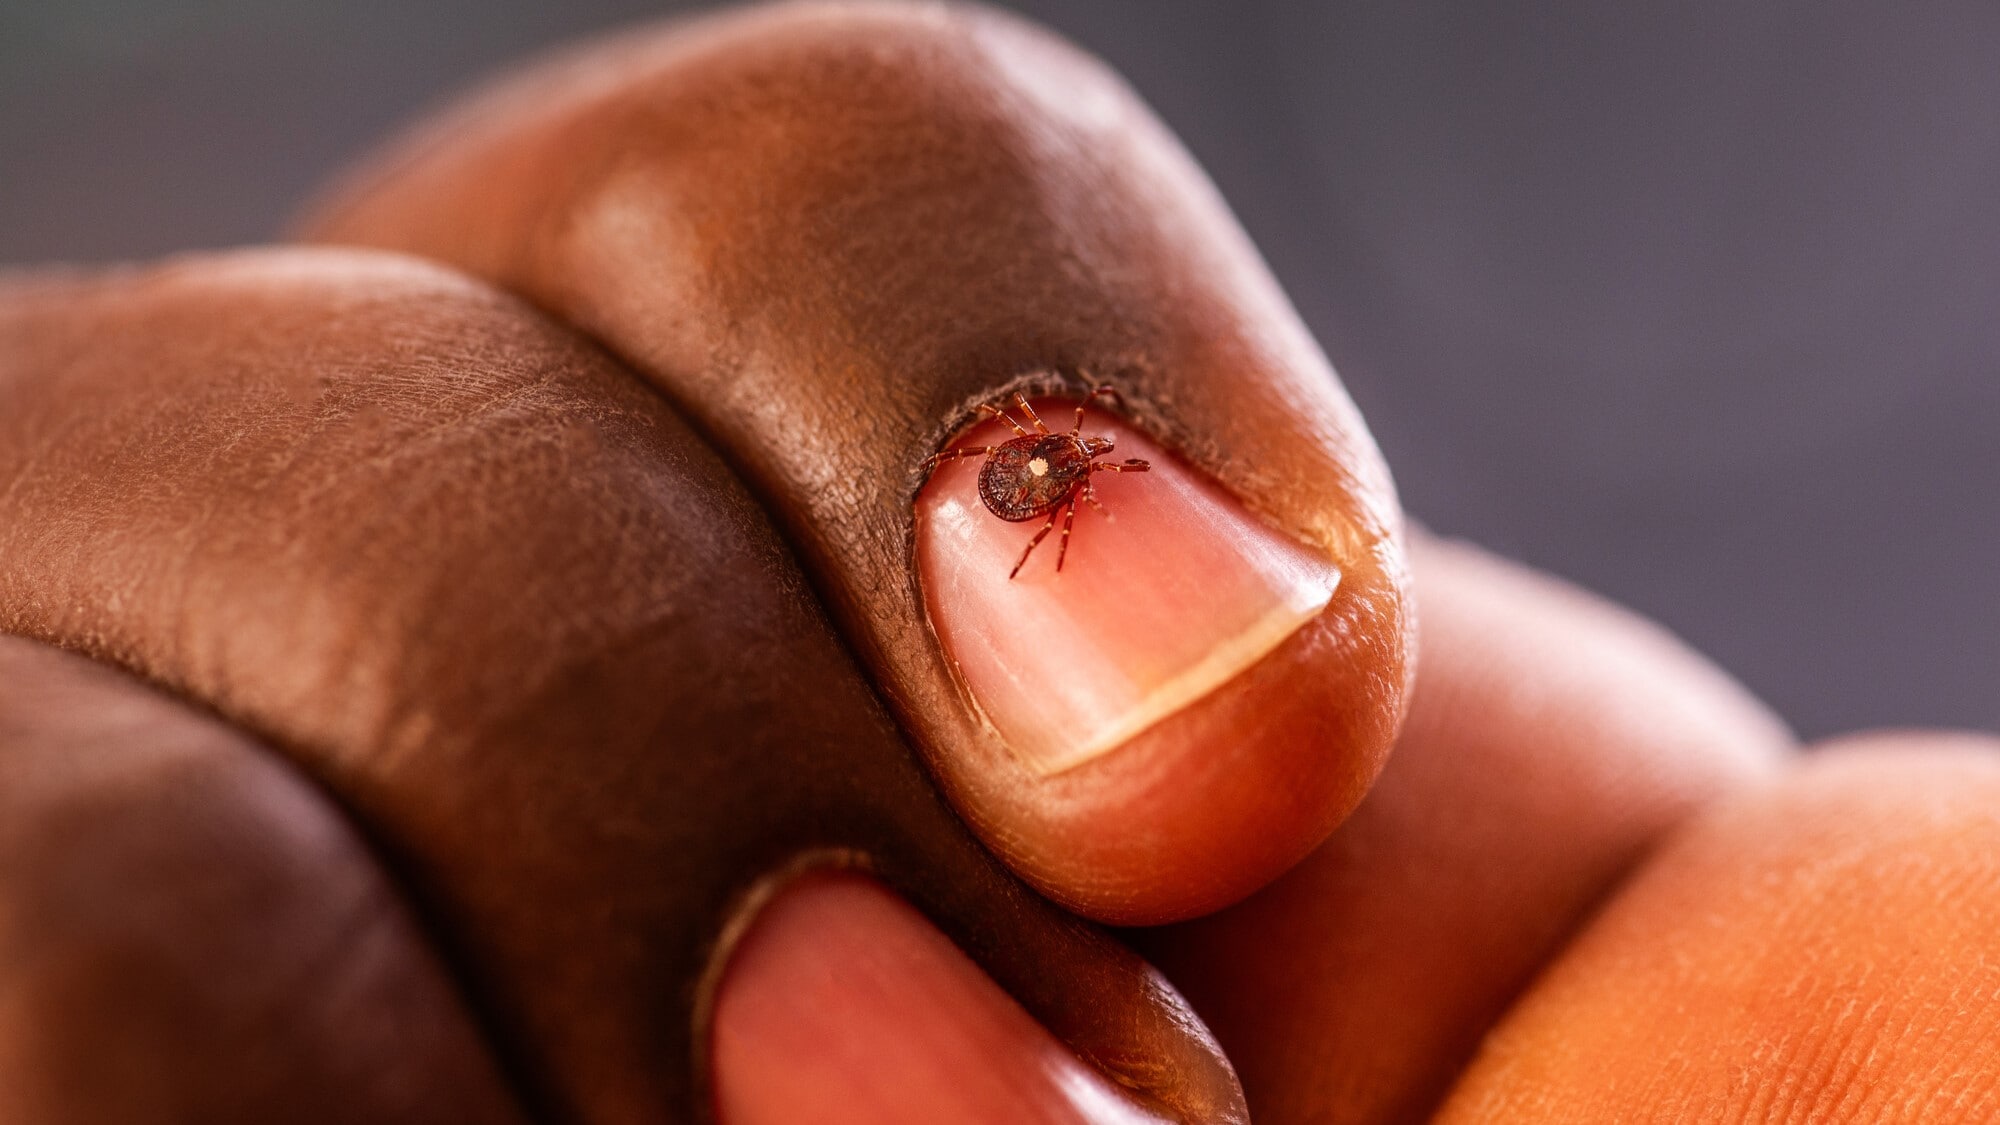 A lone star tick on a person's fingernail.